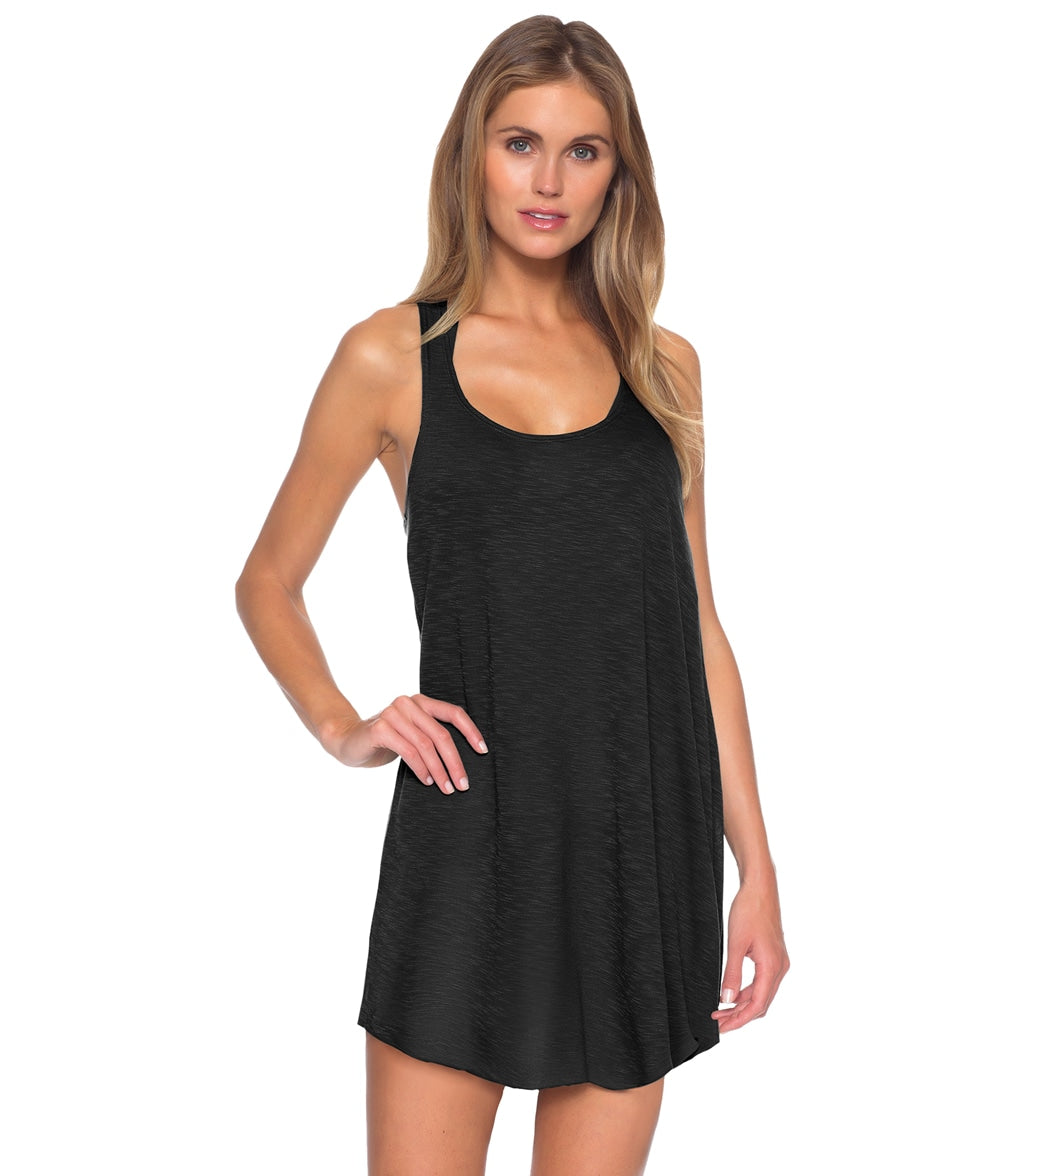 BCA by Rebecca Virtue Women's Oasis Tank Dress Cover Up at SwimOutlet.com